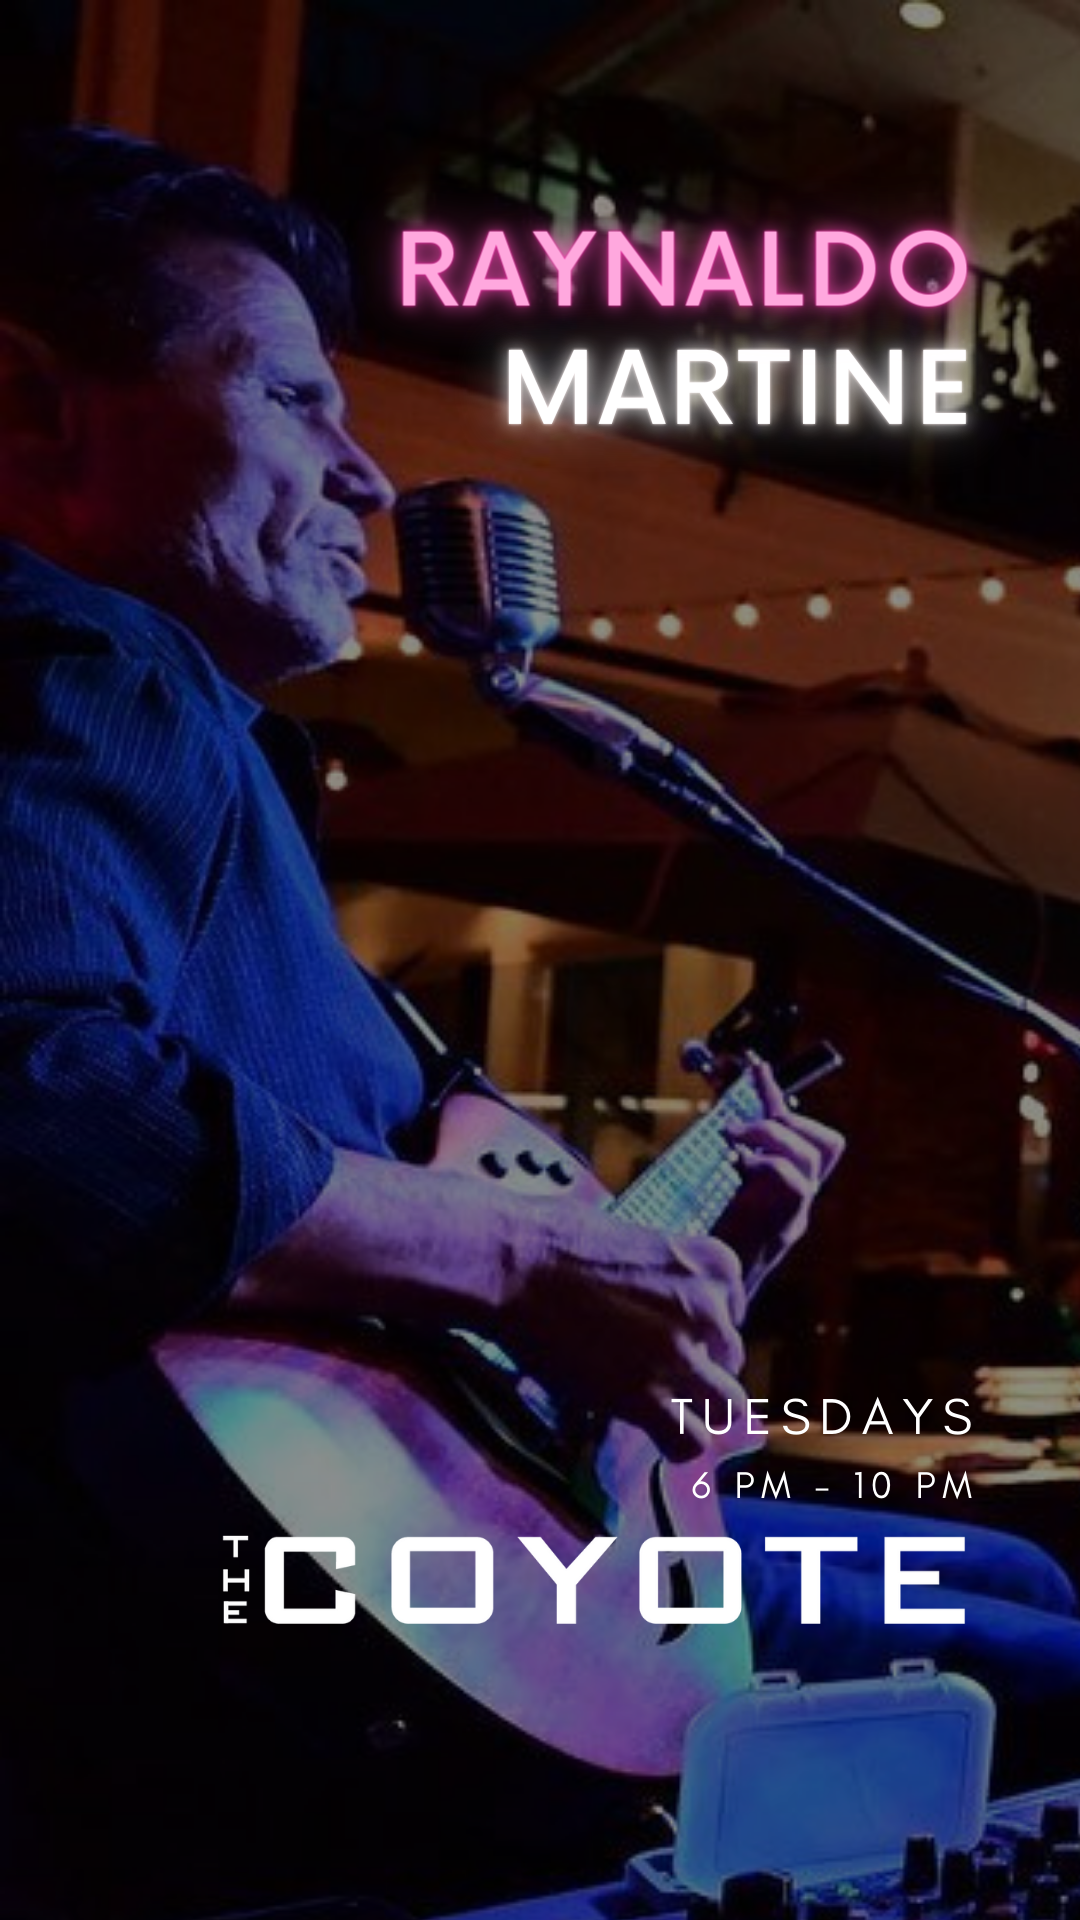 Raynaldo plays from 6-10 pm at the Coyote Bar and Grill.